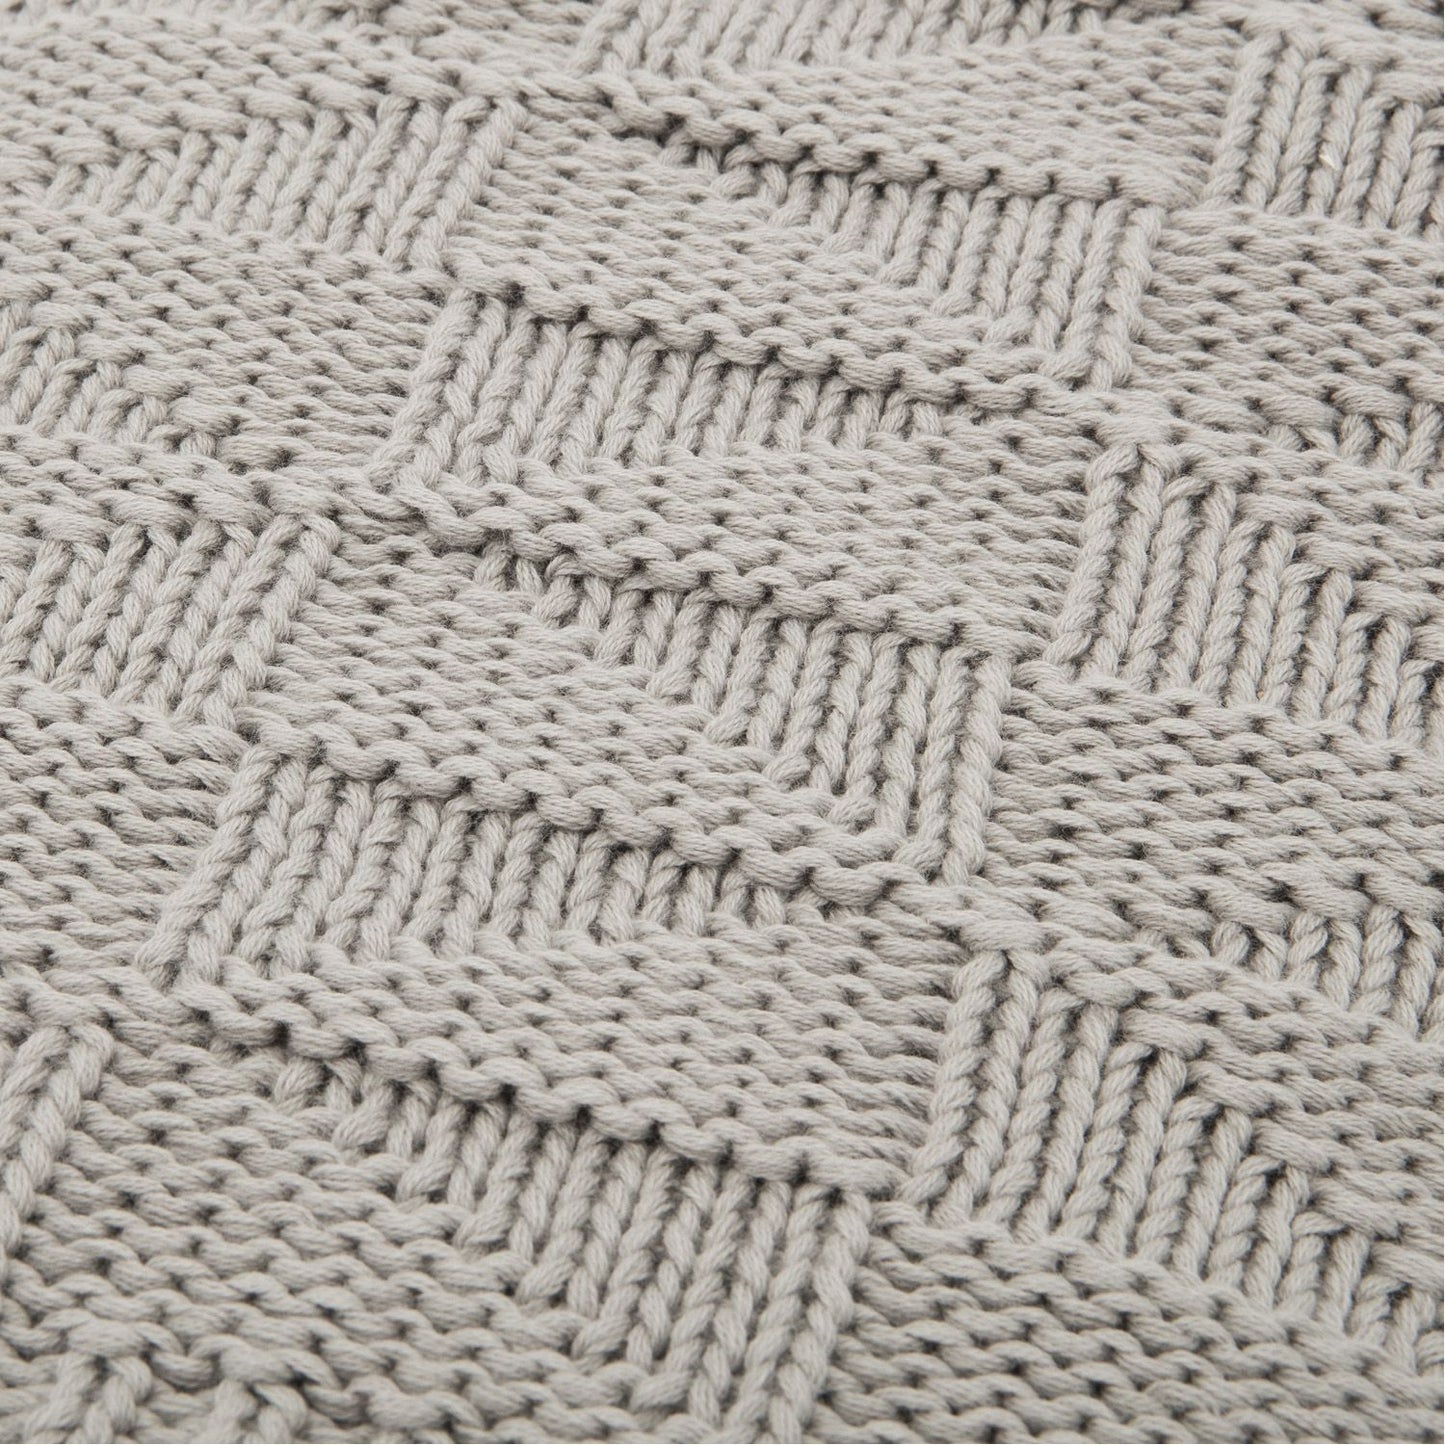 Knitted Blanket 75x100cm - Putty